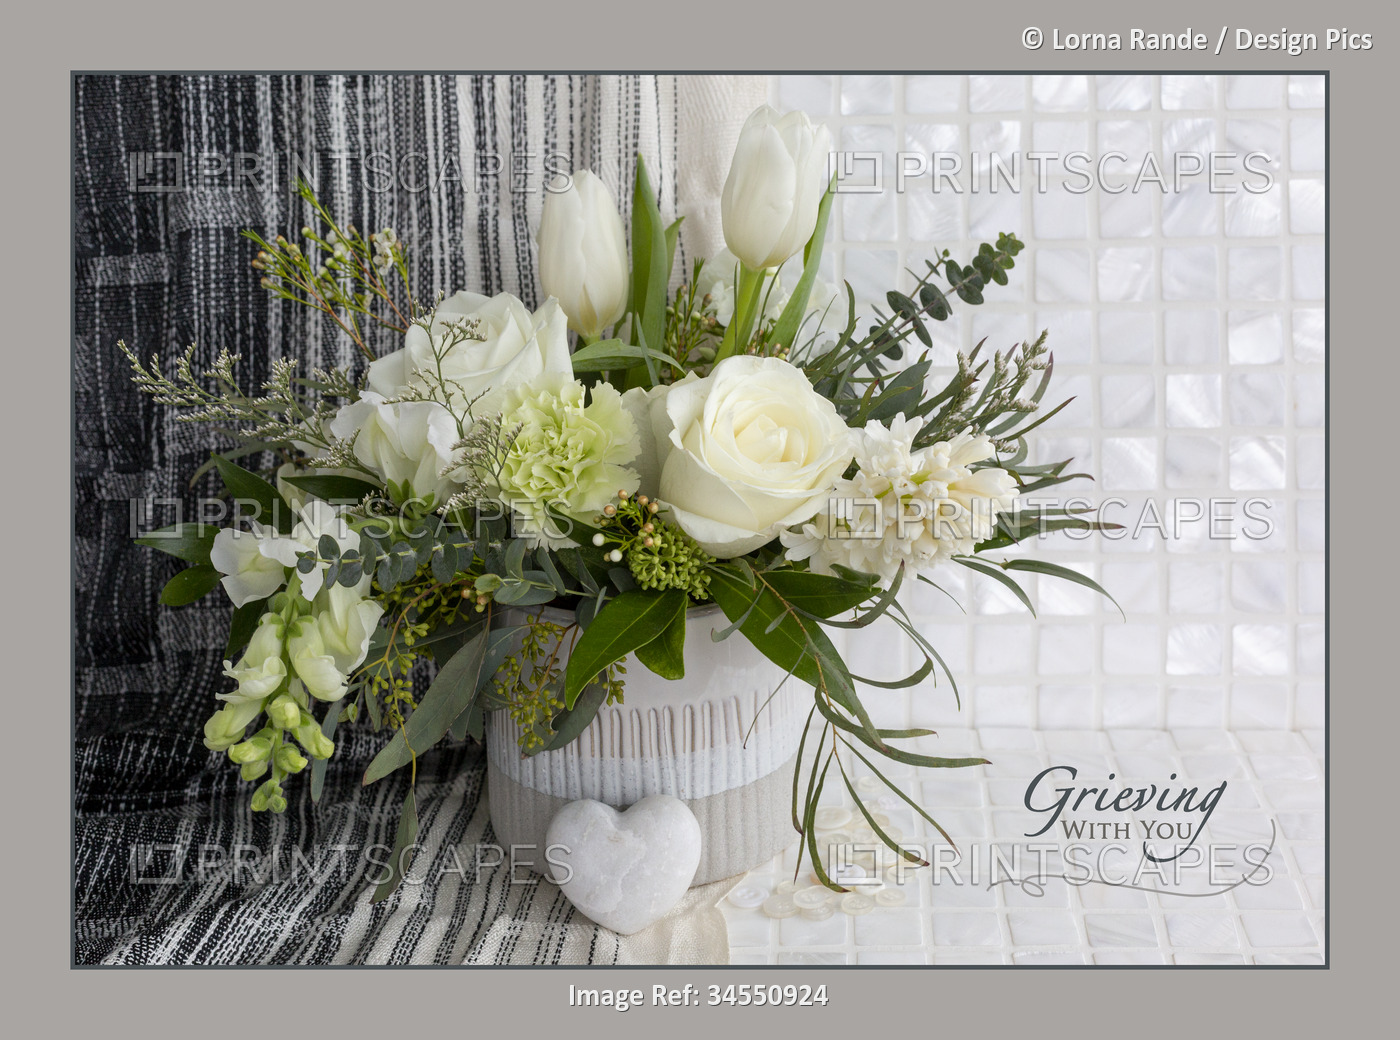 Flower art with a white floral bouquet and caption 'Grieving with you'; Studio